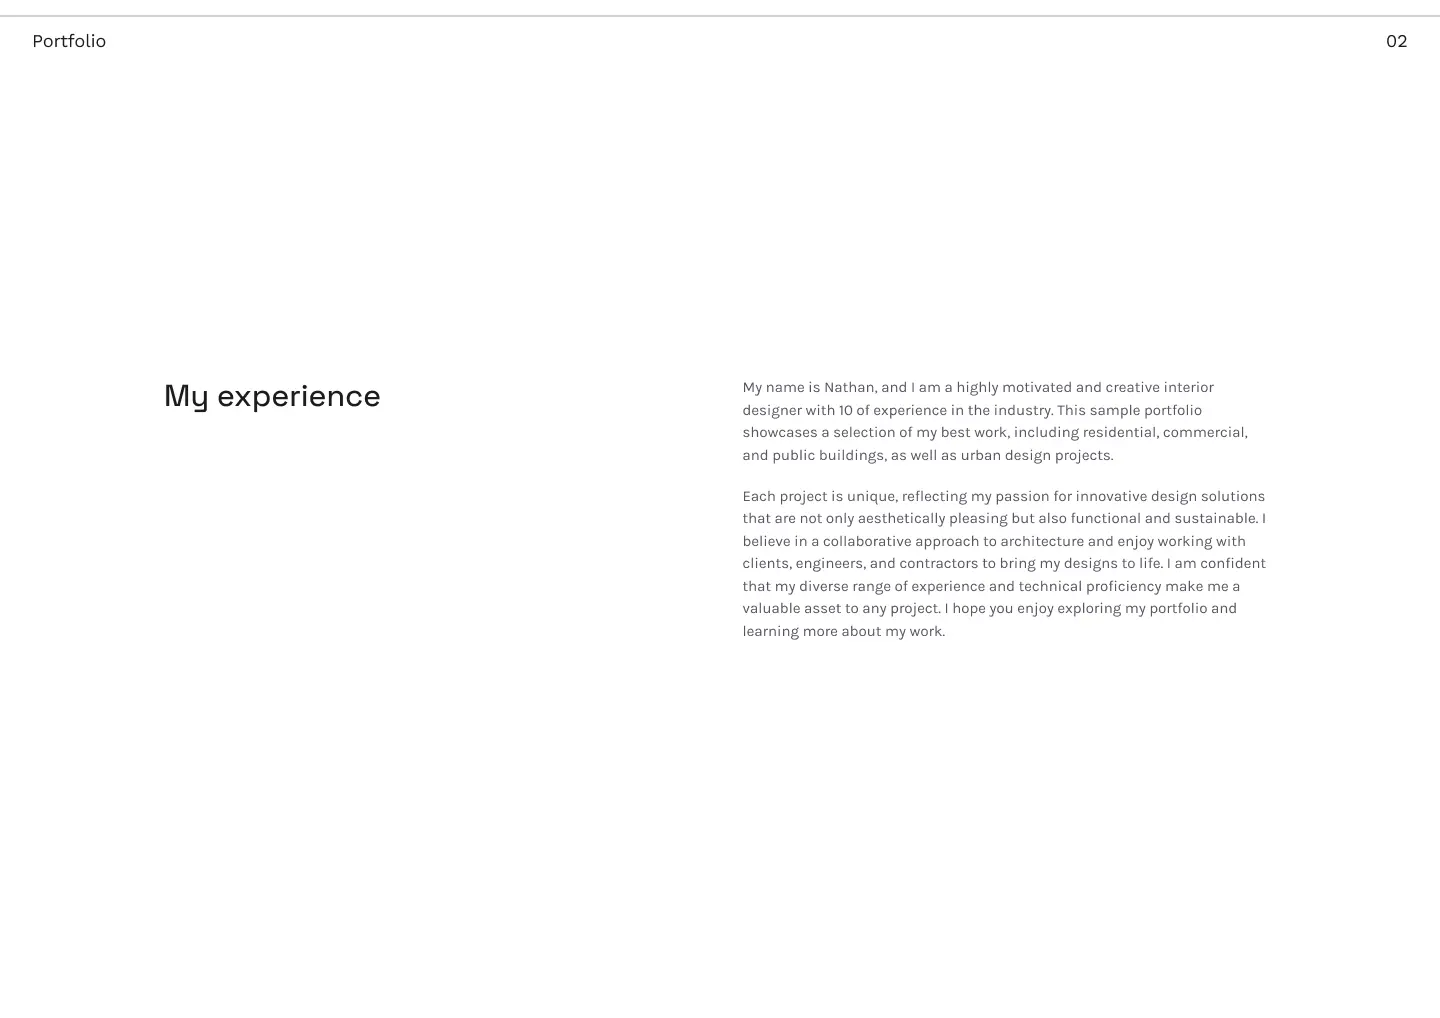 The second page of the PDF architecture portfolio, with a short description of the architect’s work experience